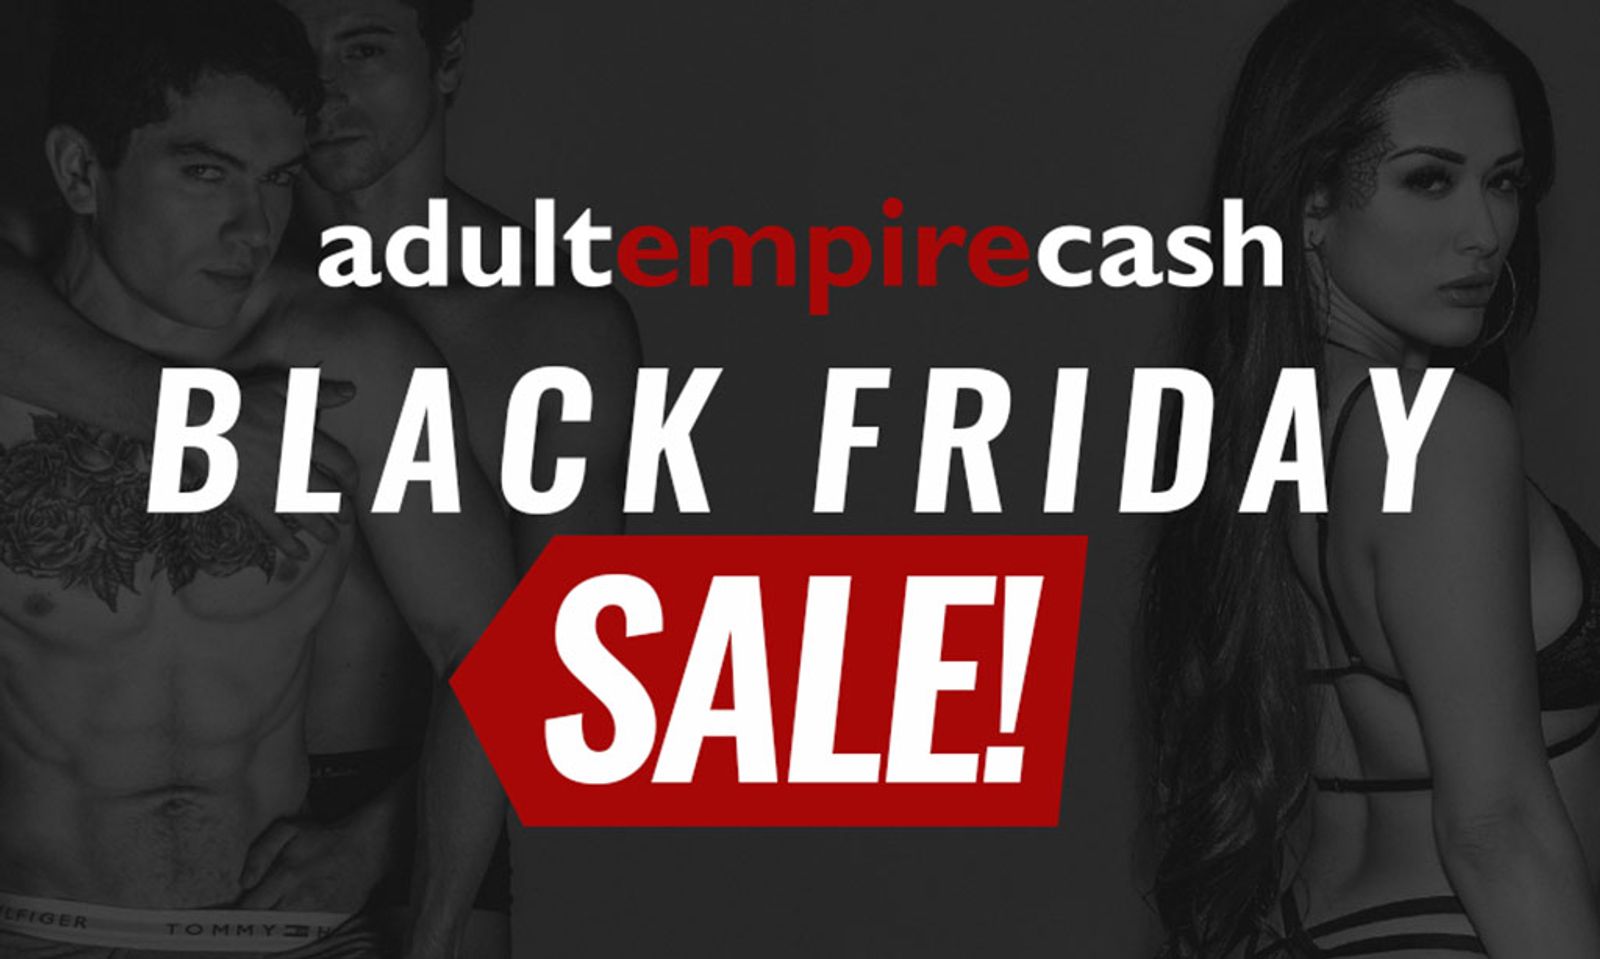 It's Almost Black Friday And Adult Empire Cash Is Having A Sale